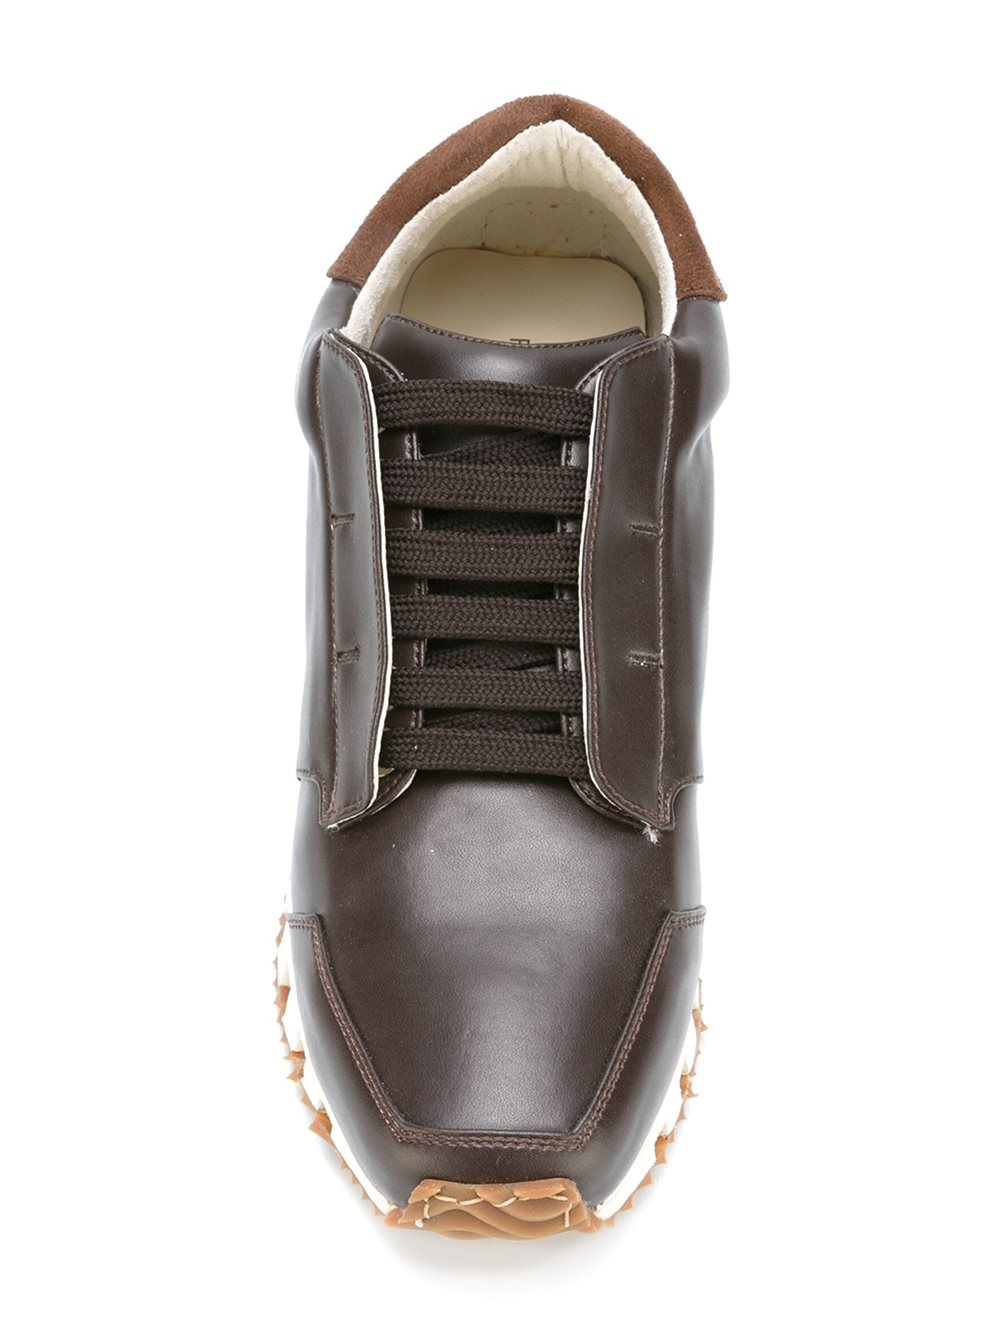 Rombaut Cotton 'Insight II' Sneakers in Brown for Men - Lyst